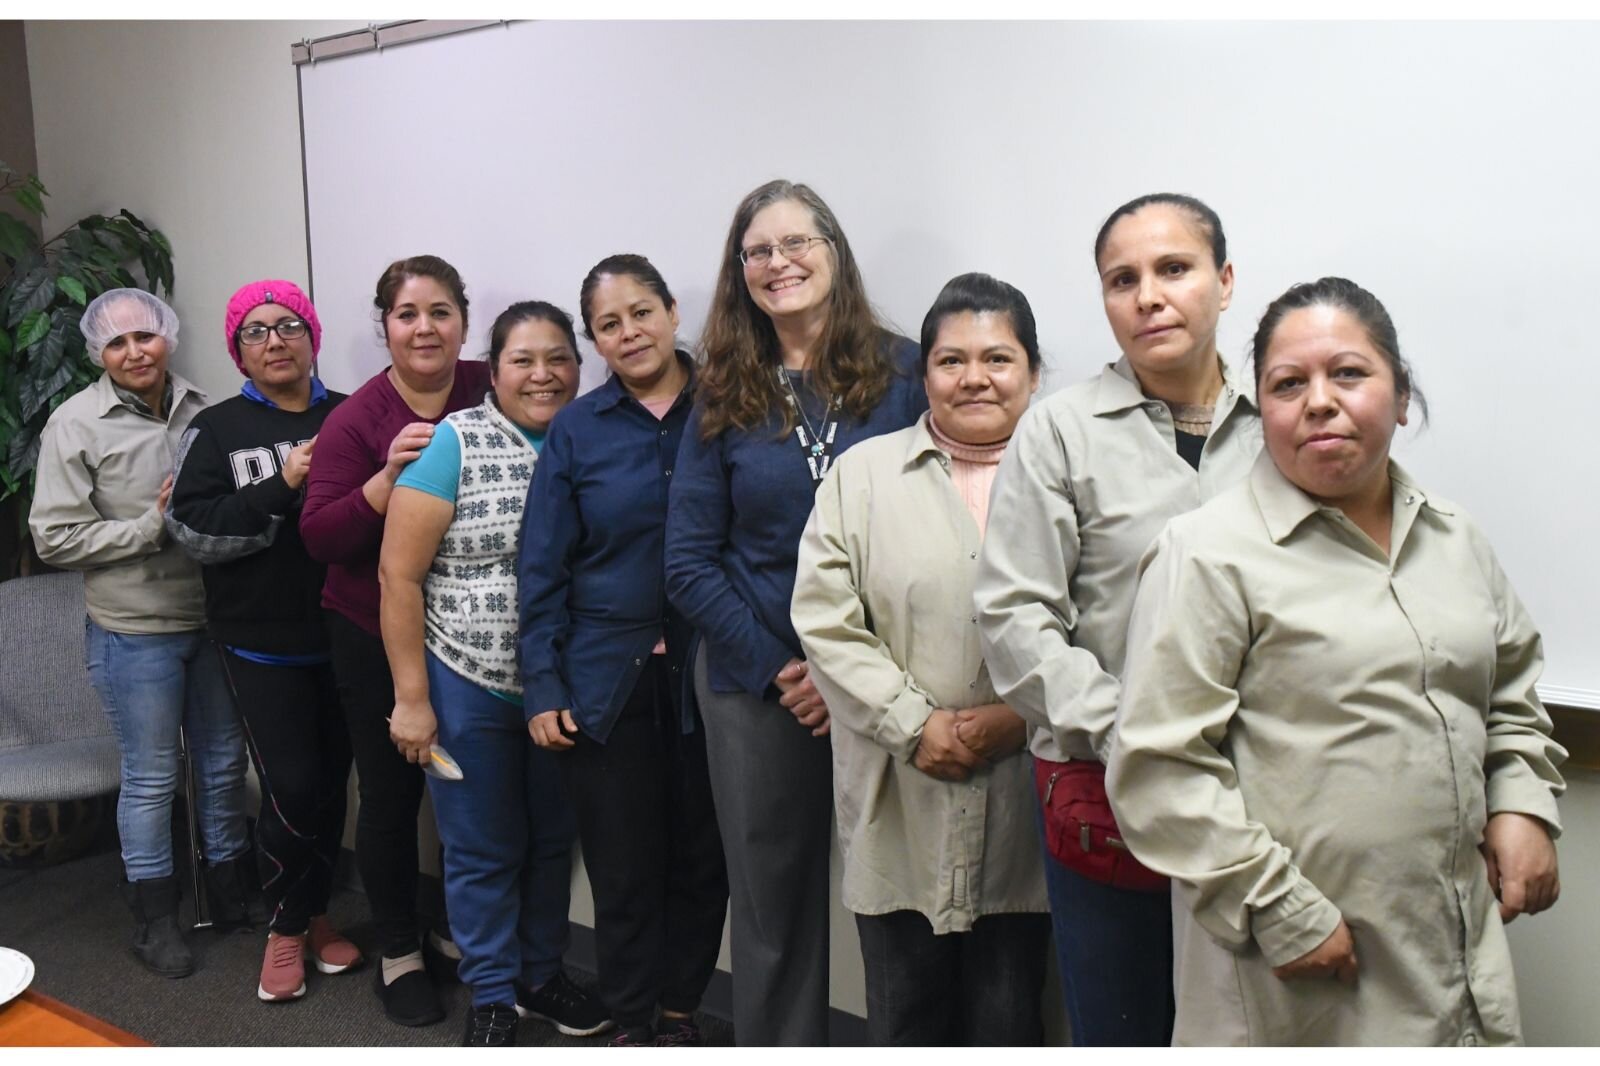 Posing for a photo Snackwerks employees who completed the “Workforce English as a New Language” course. Fifth from the right is Mary Okamoto of VOCES.